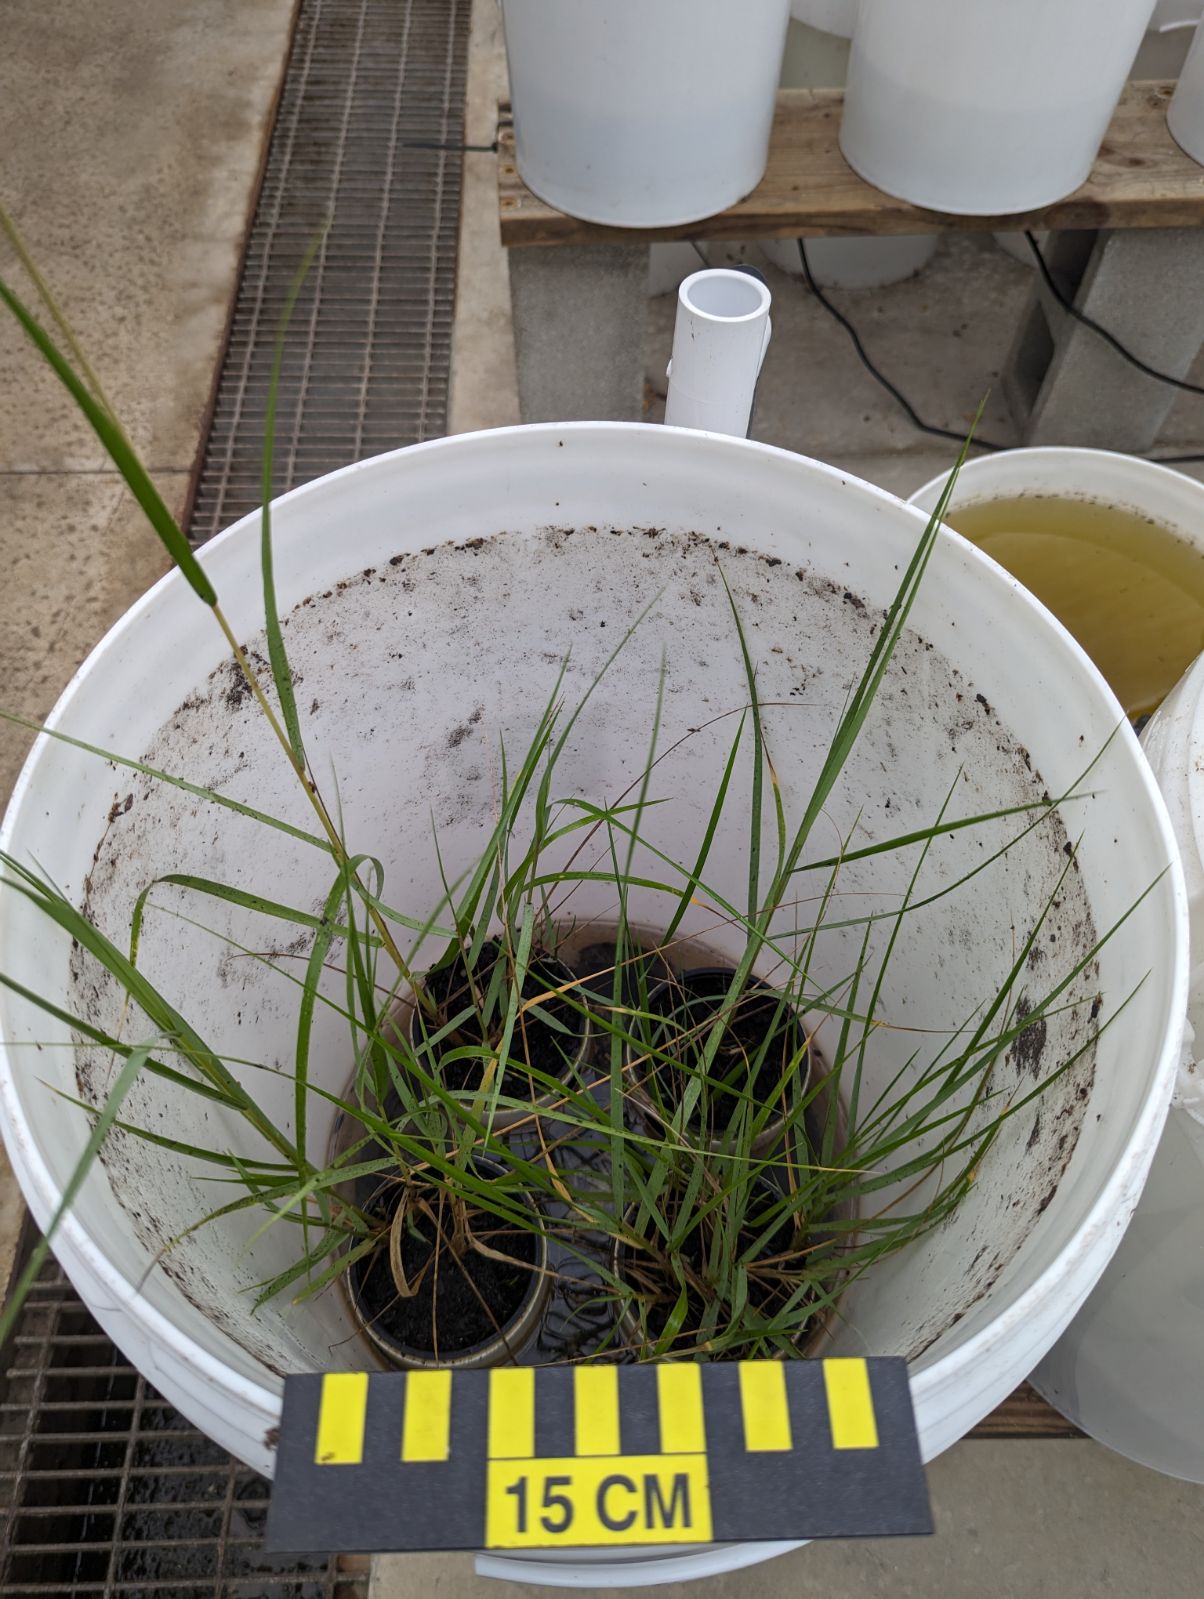 A 12 gallon bucket with small pots of tall grass set in the bottom and surrounded by water.